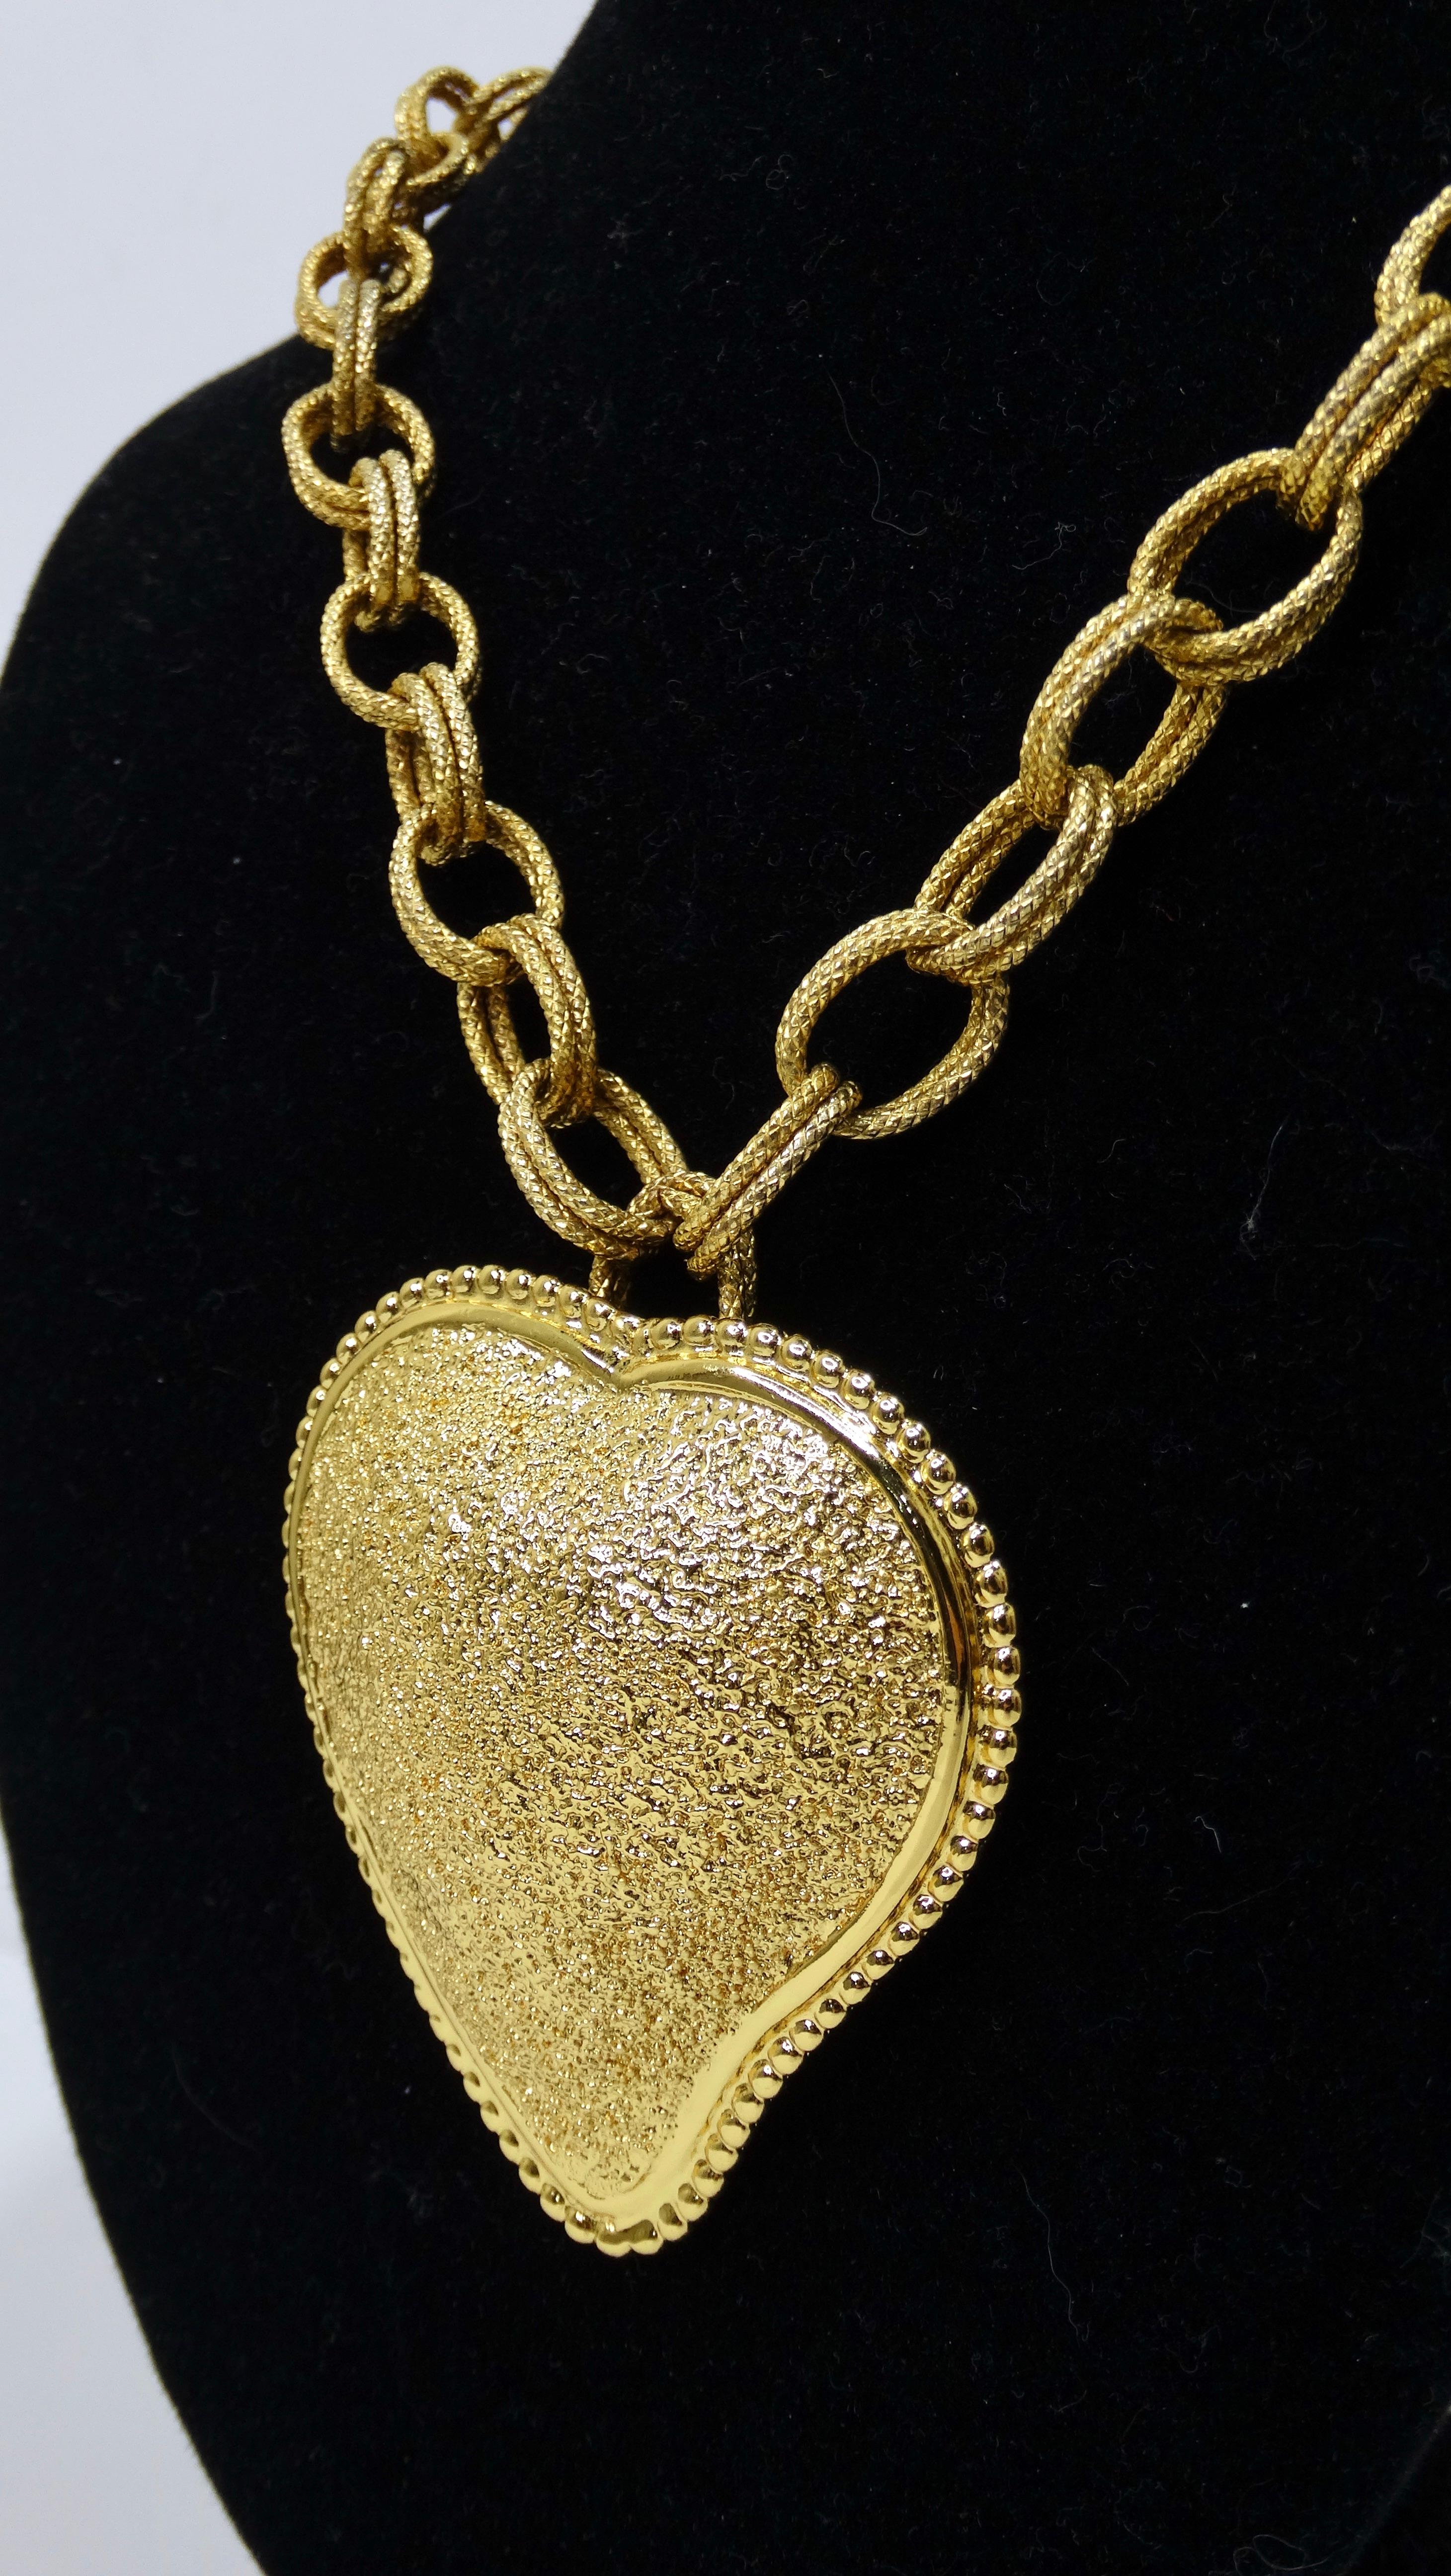 This necklace is a Yves Saint Laurent dream! Be prepared for all the compliments after receiving this vintage gem. Chunky pendants are all the talk and you need to be apart of this! This necklace is featured in a beautifully textured and brushed